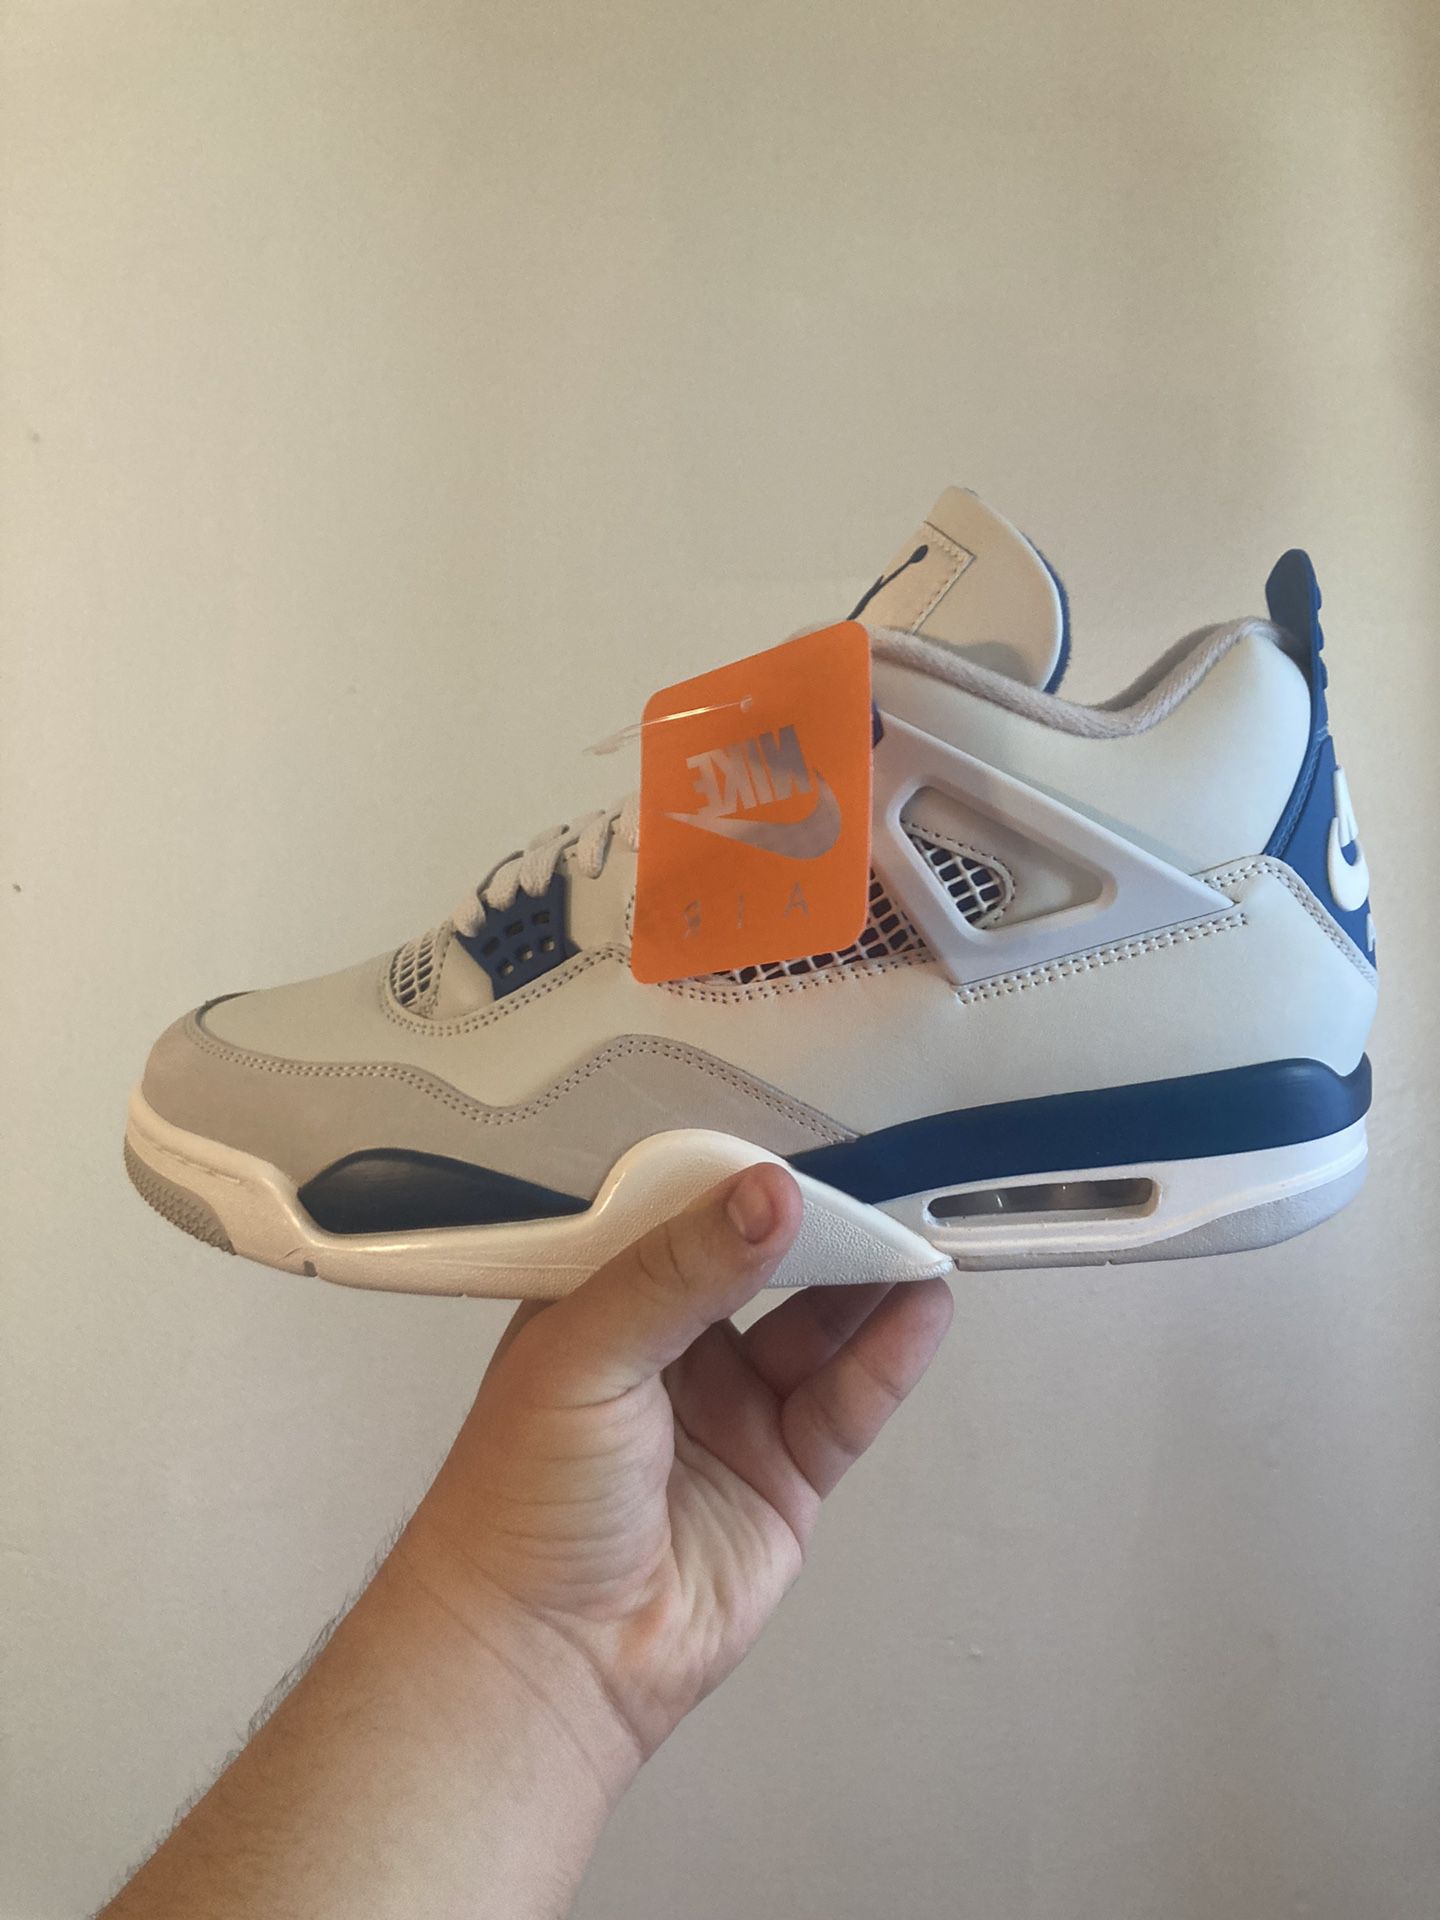 only pick up size 11 new air jordan 4 military blues  